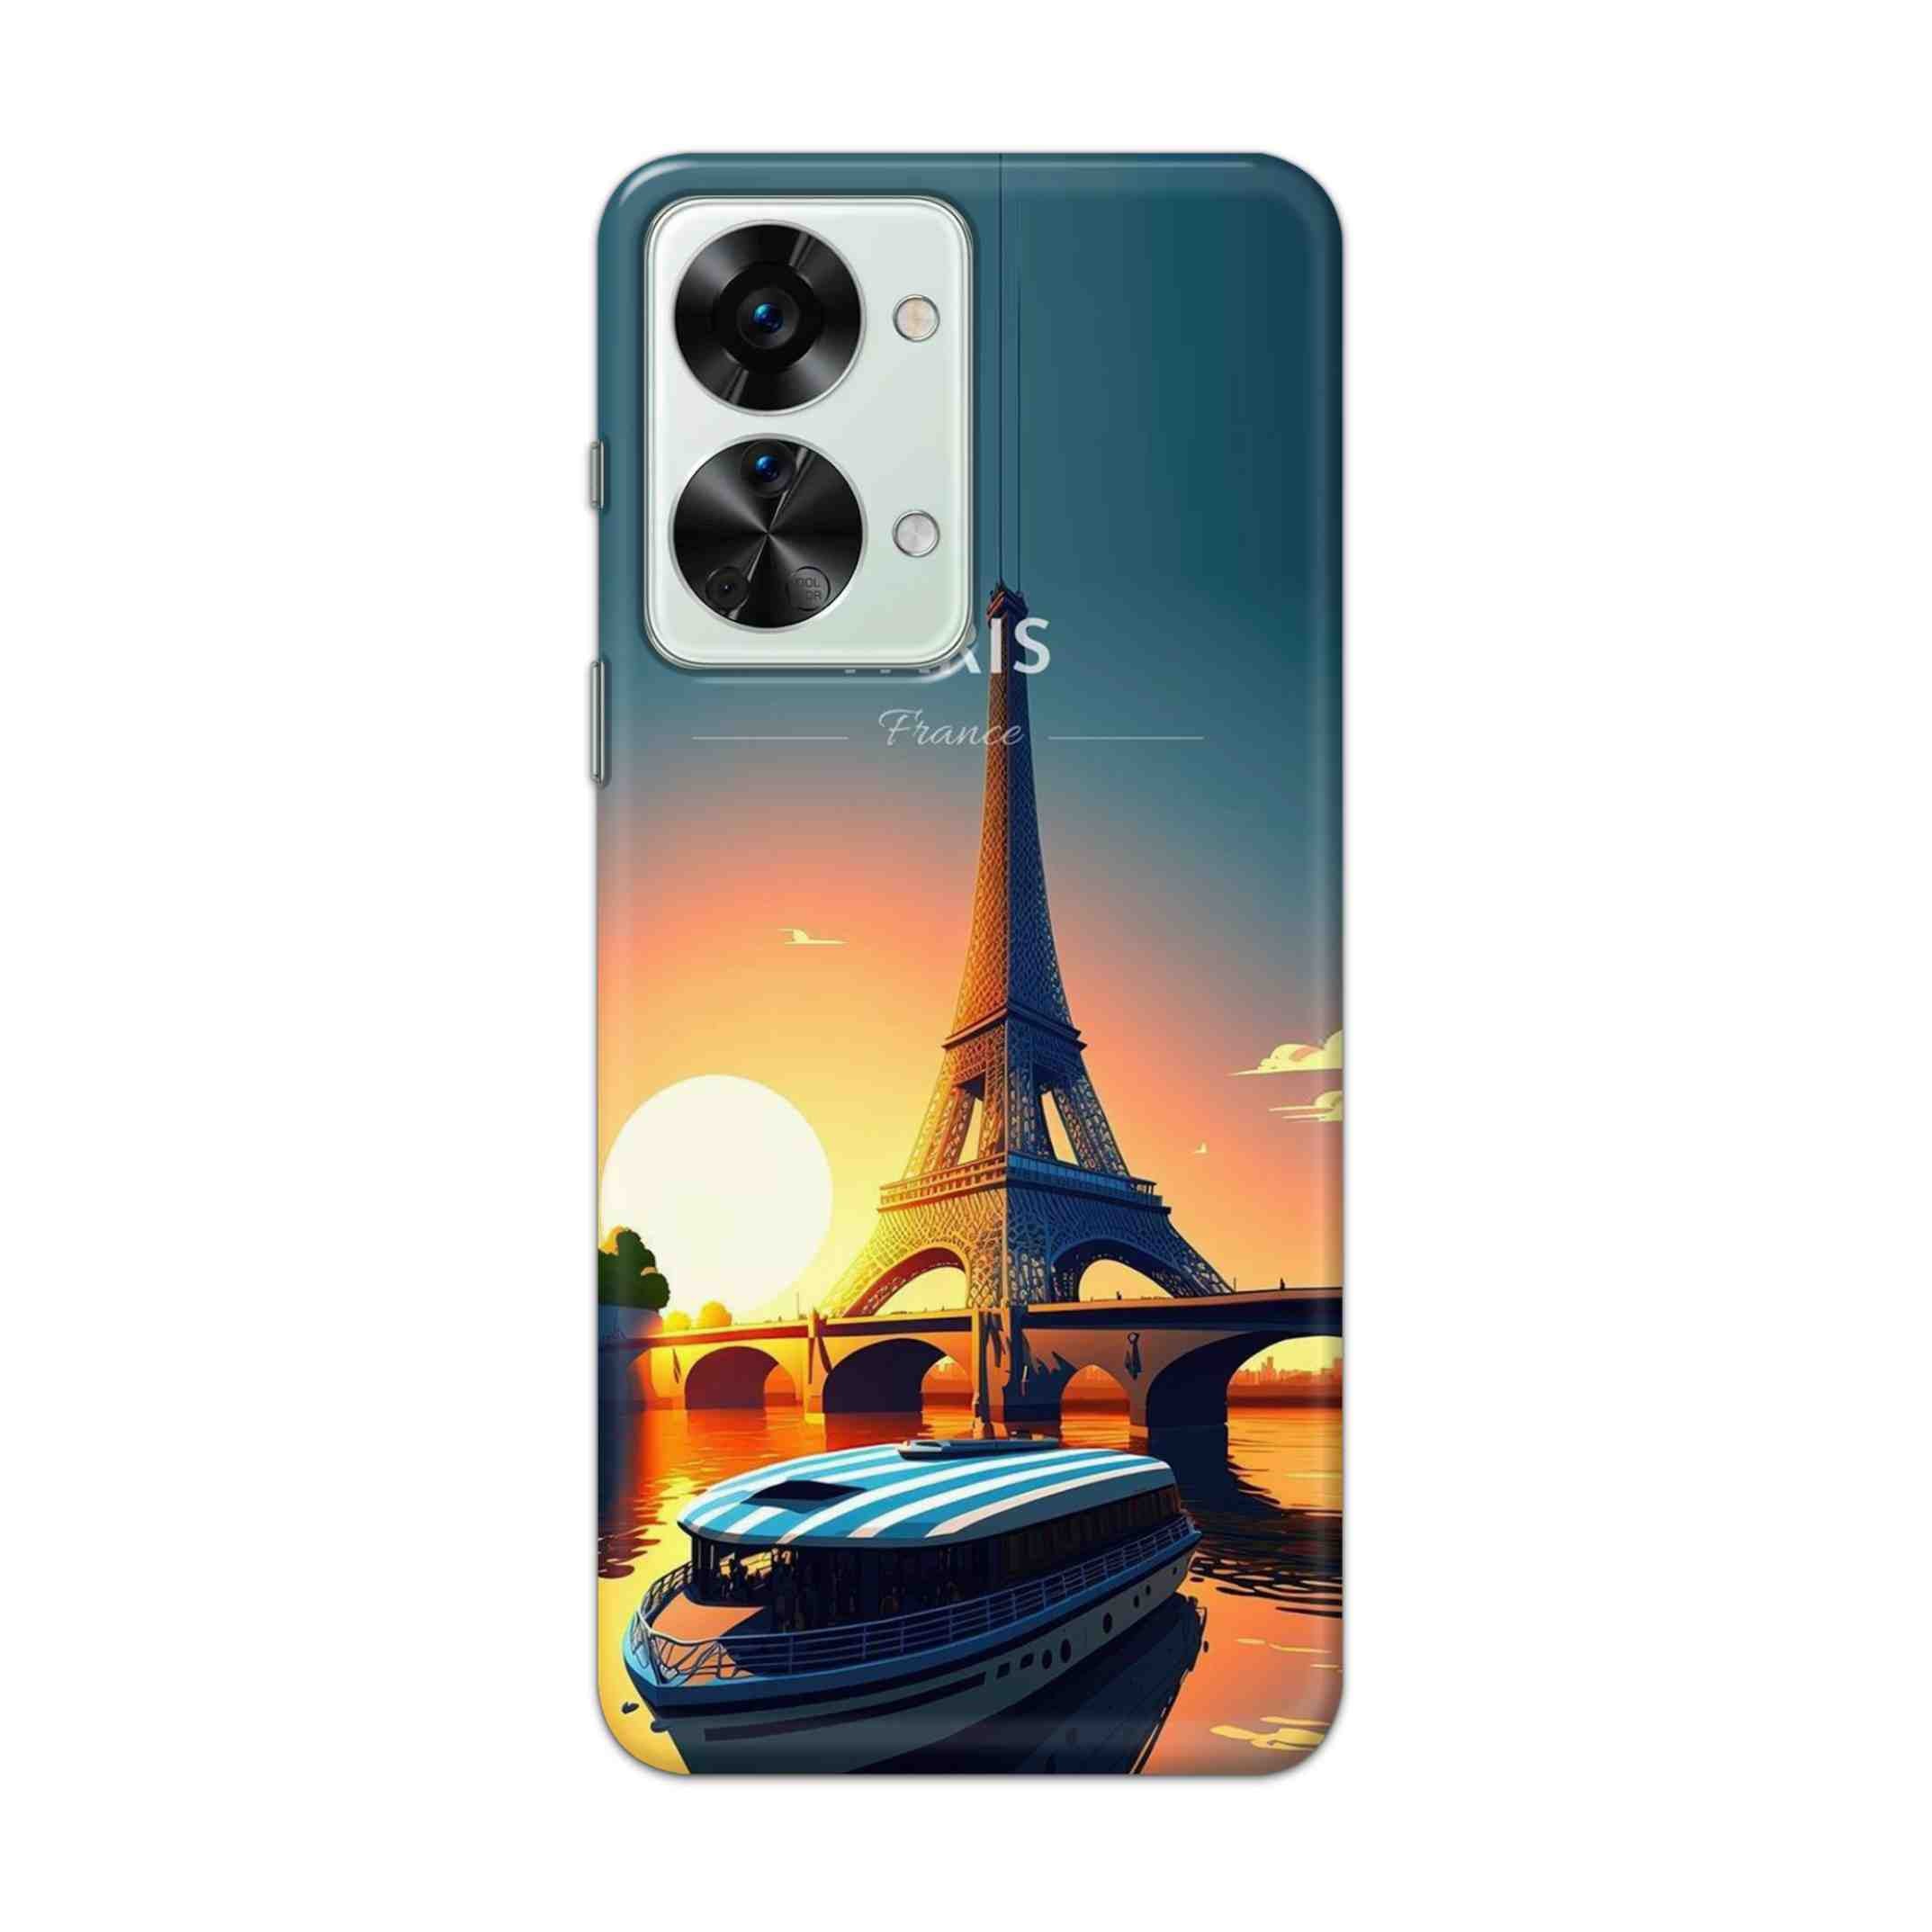 Buy France Hard Back Mobile Phone Case Cover For OnePlus Nord 2T 5G Online